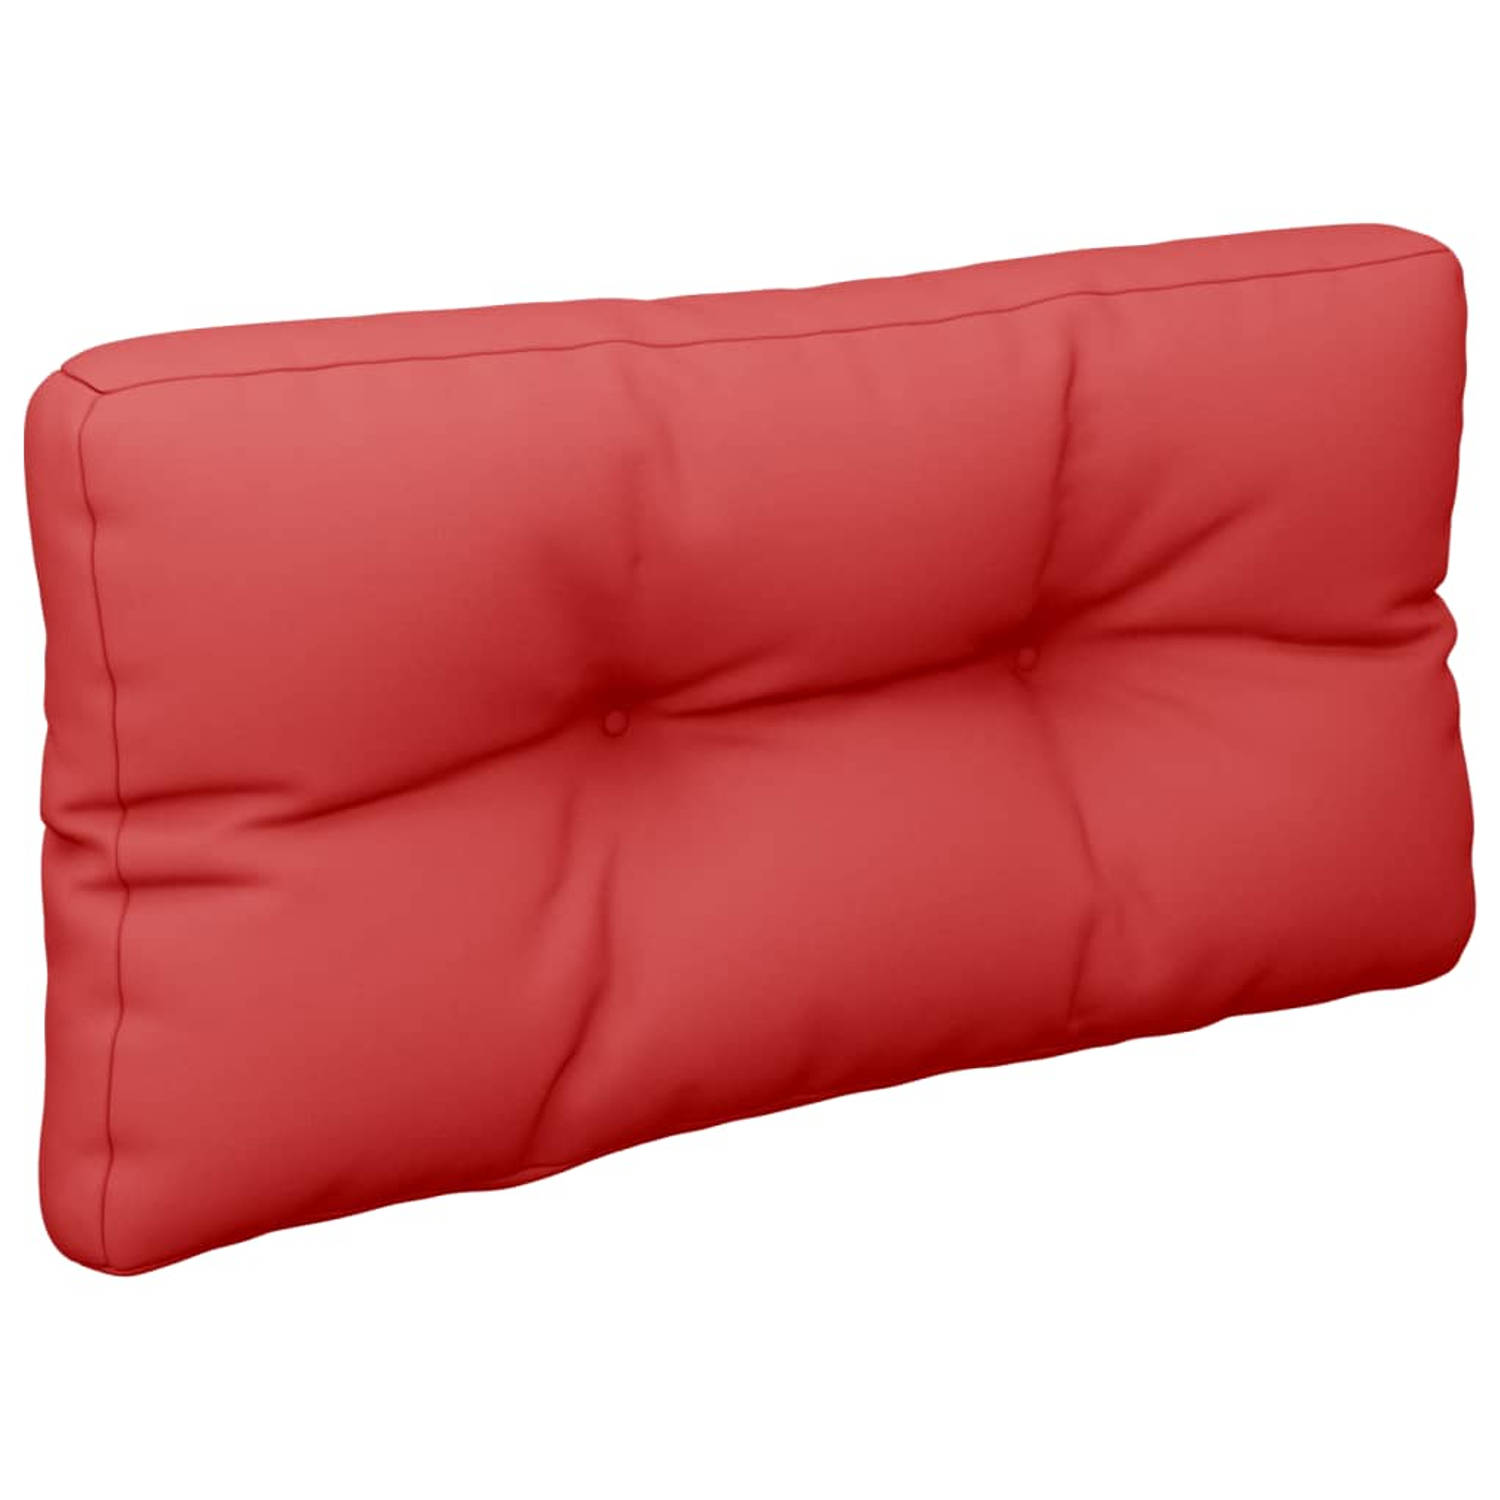 The Living Store Palletbank Rugkussen - 70x40x10 cm - Rood - 100% polyester